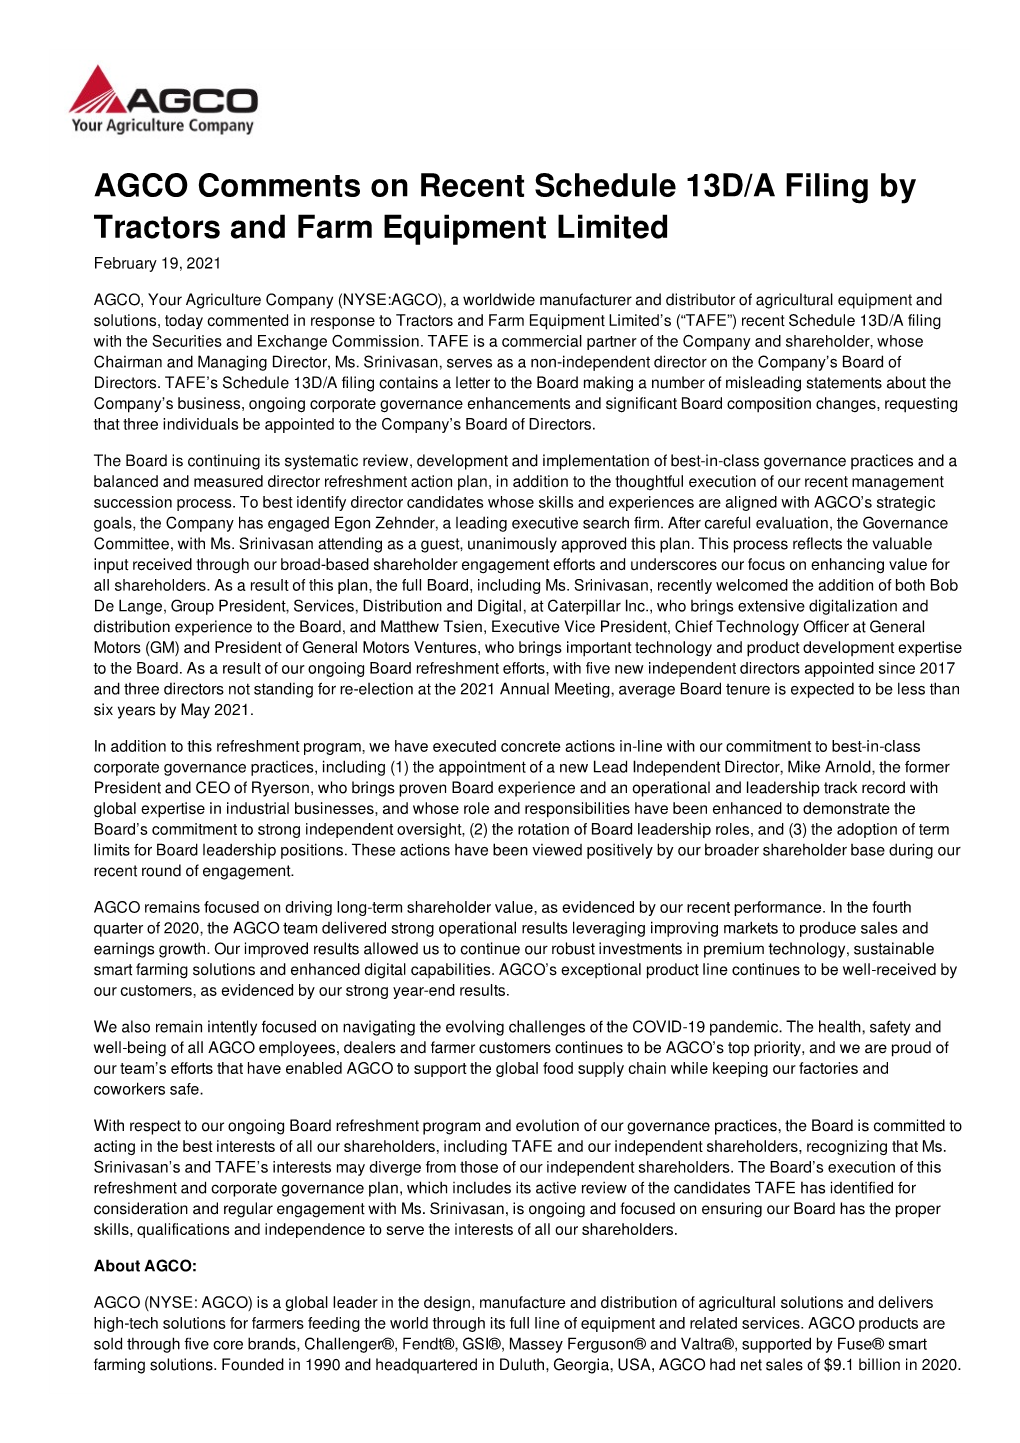 AGCO Comments on Recent Schedule 13D/A Filing by Tractors and Farm Equipment Limited February 19, 2021